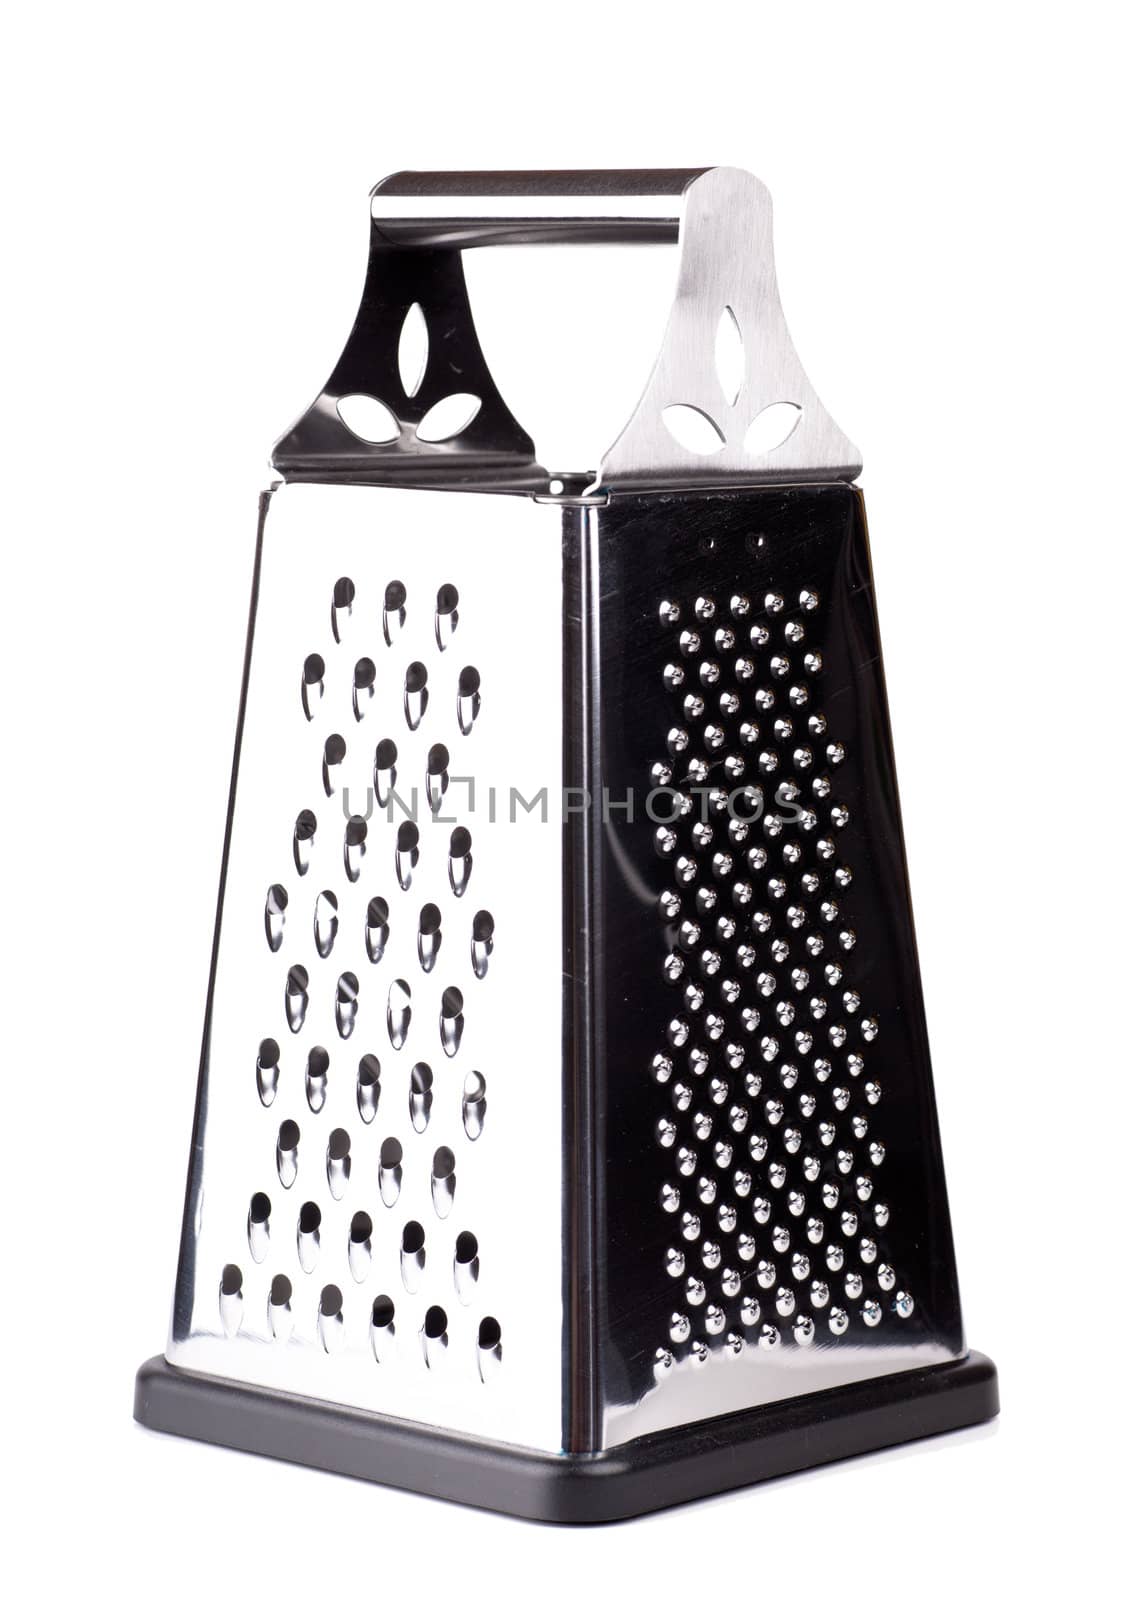 Single kitchen grater isolated over white background